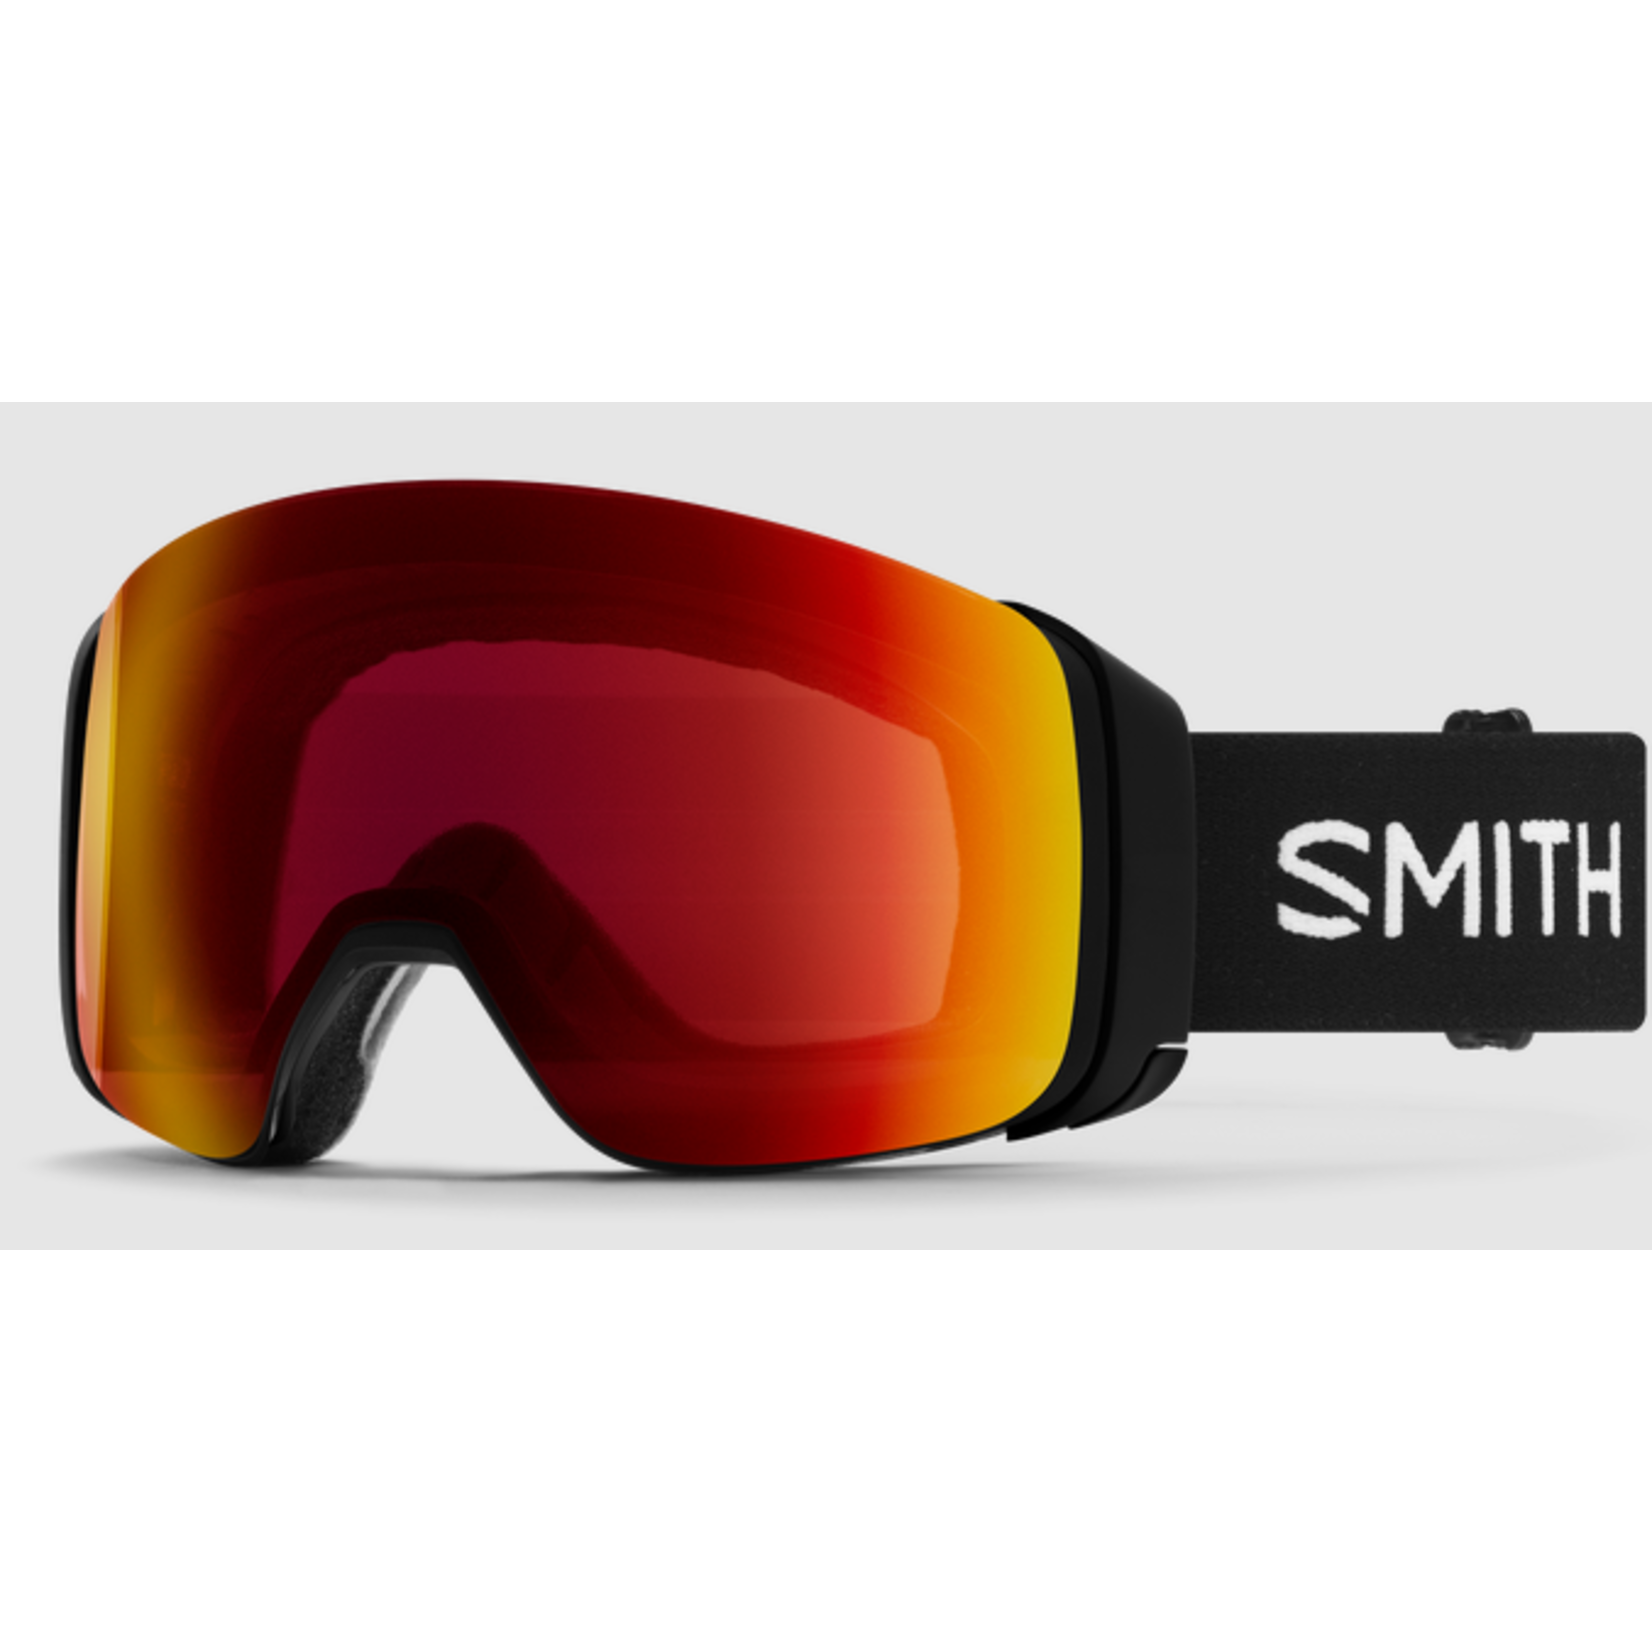 Smith 4D Mag S Goggles 22/23